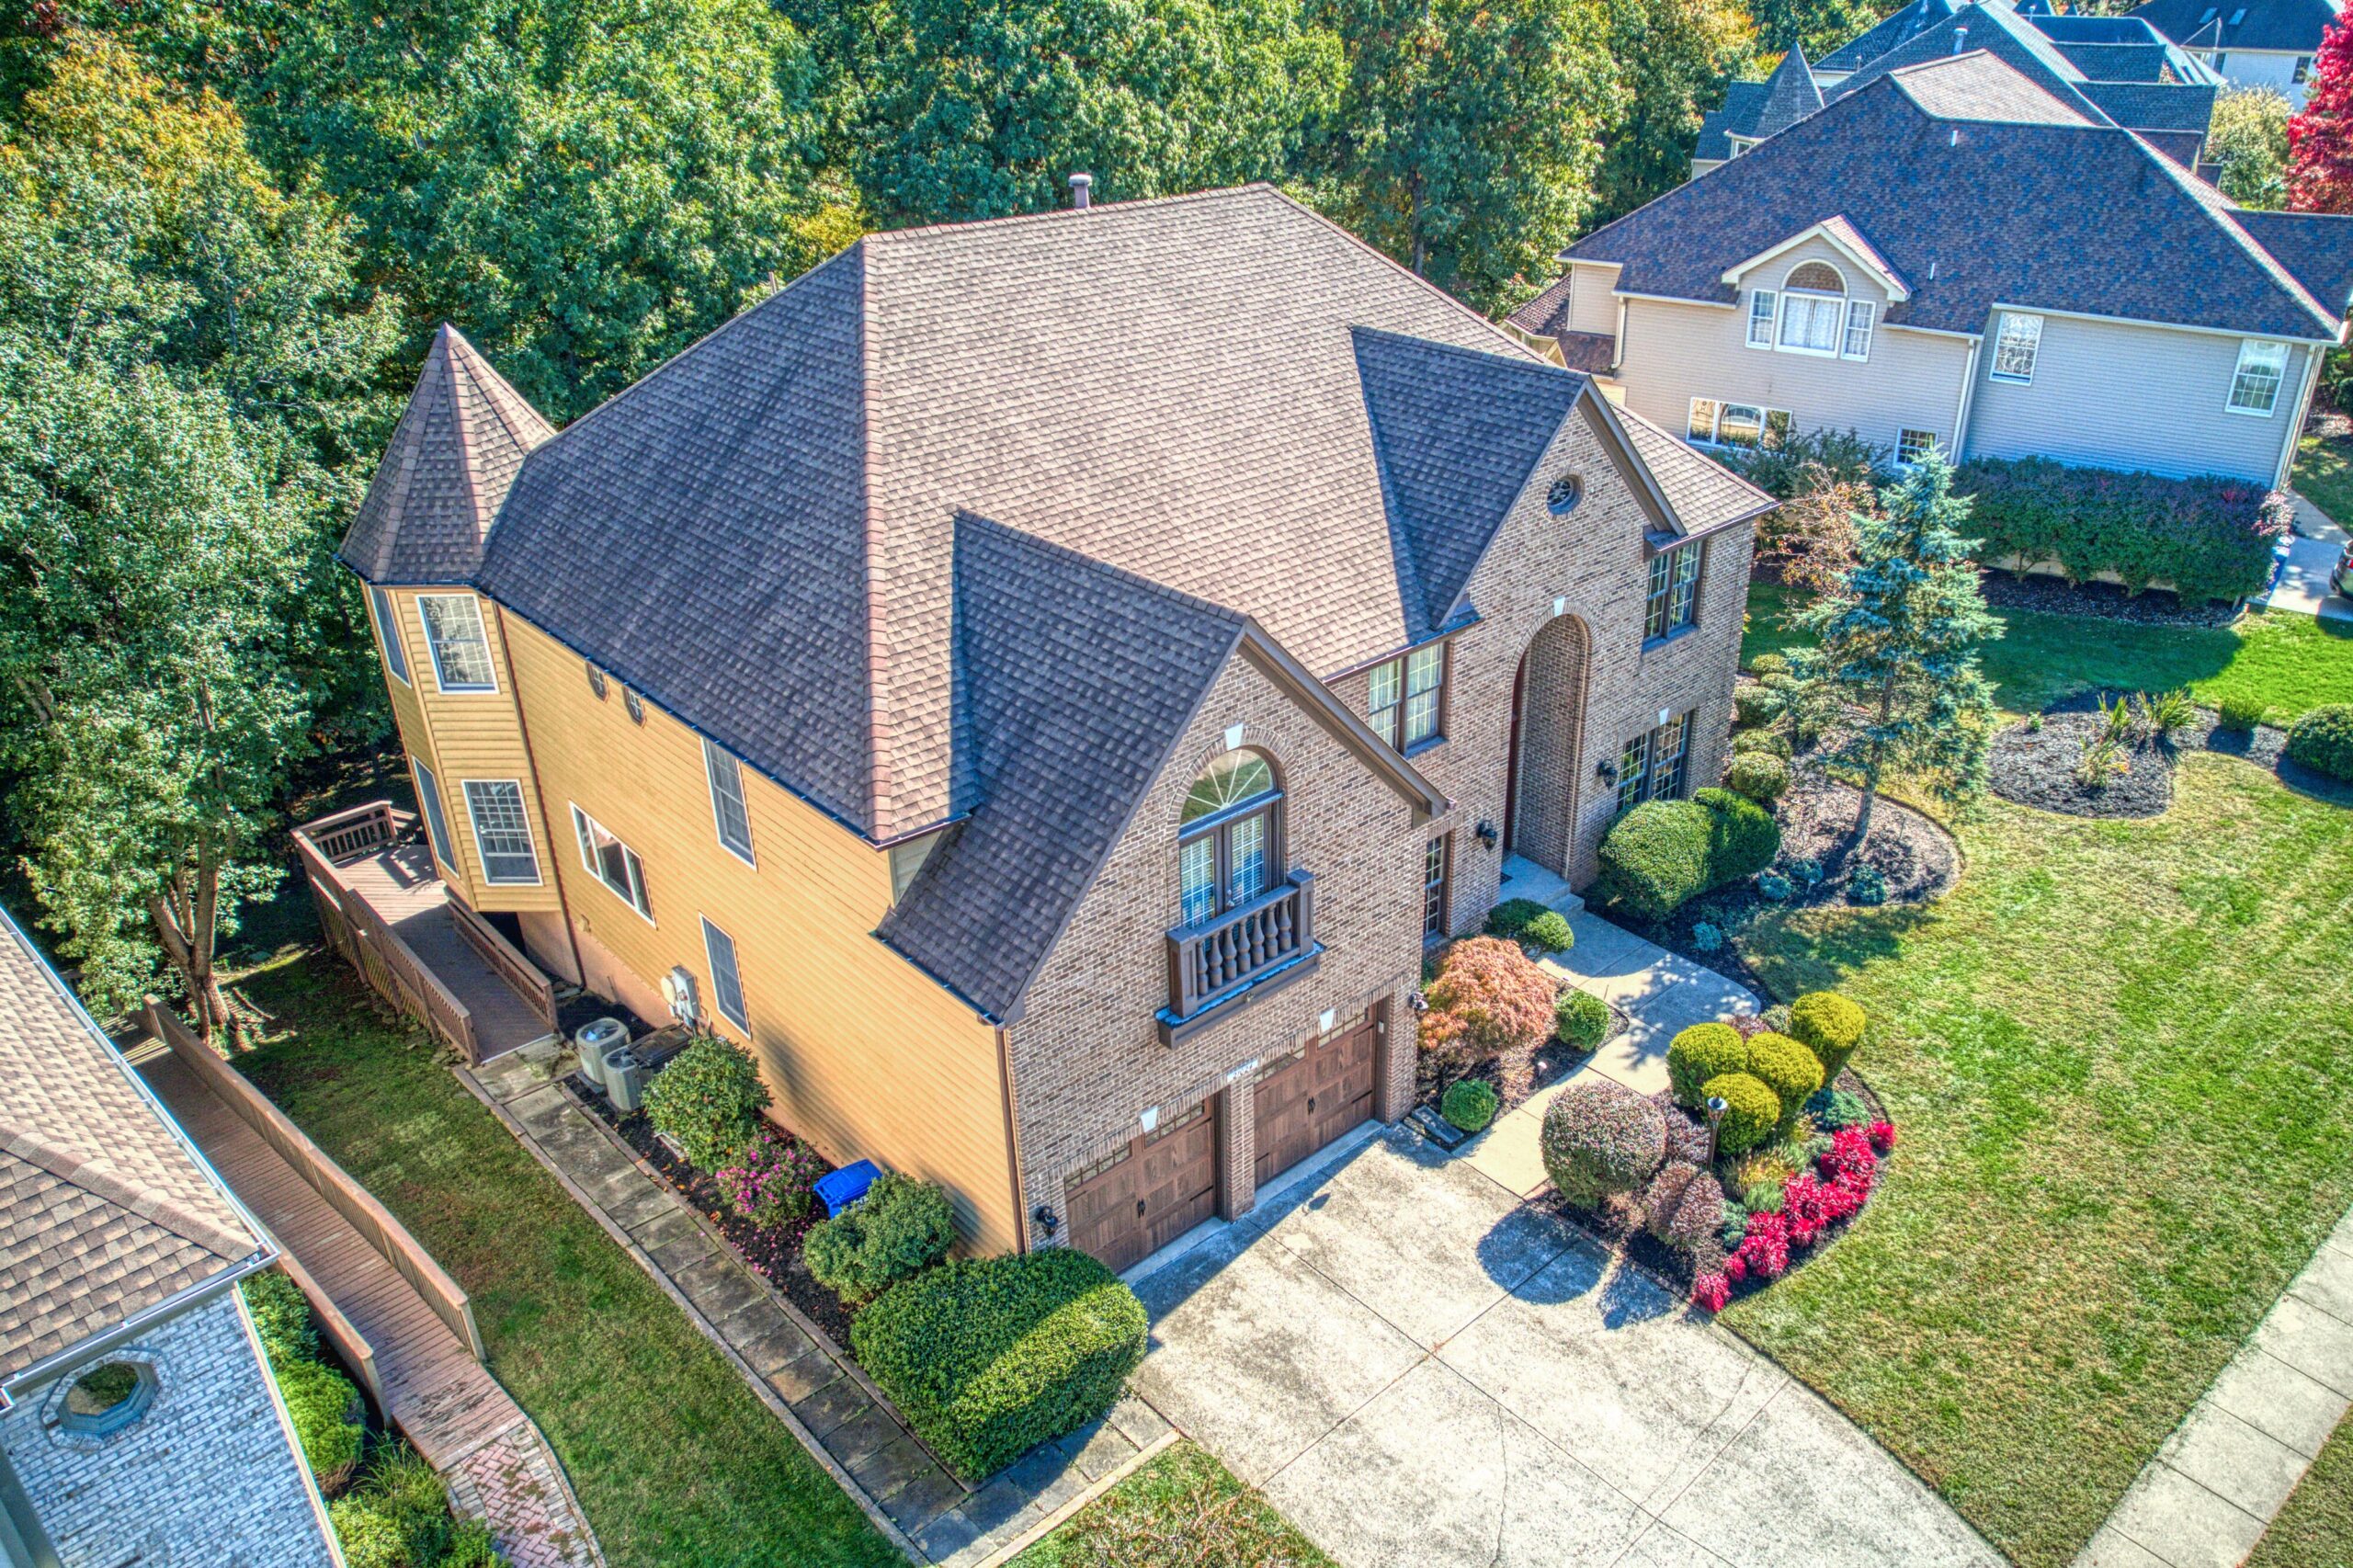 Aerial professional exterior photo of 21024 Starflower Way in Ashburn, VA - showing the entire brown brick home from the front at an angle